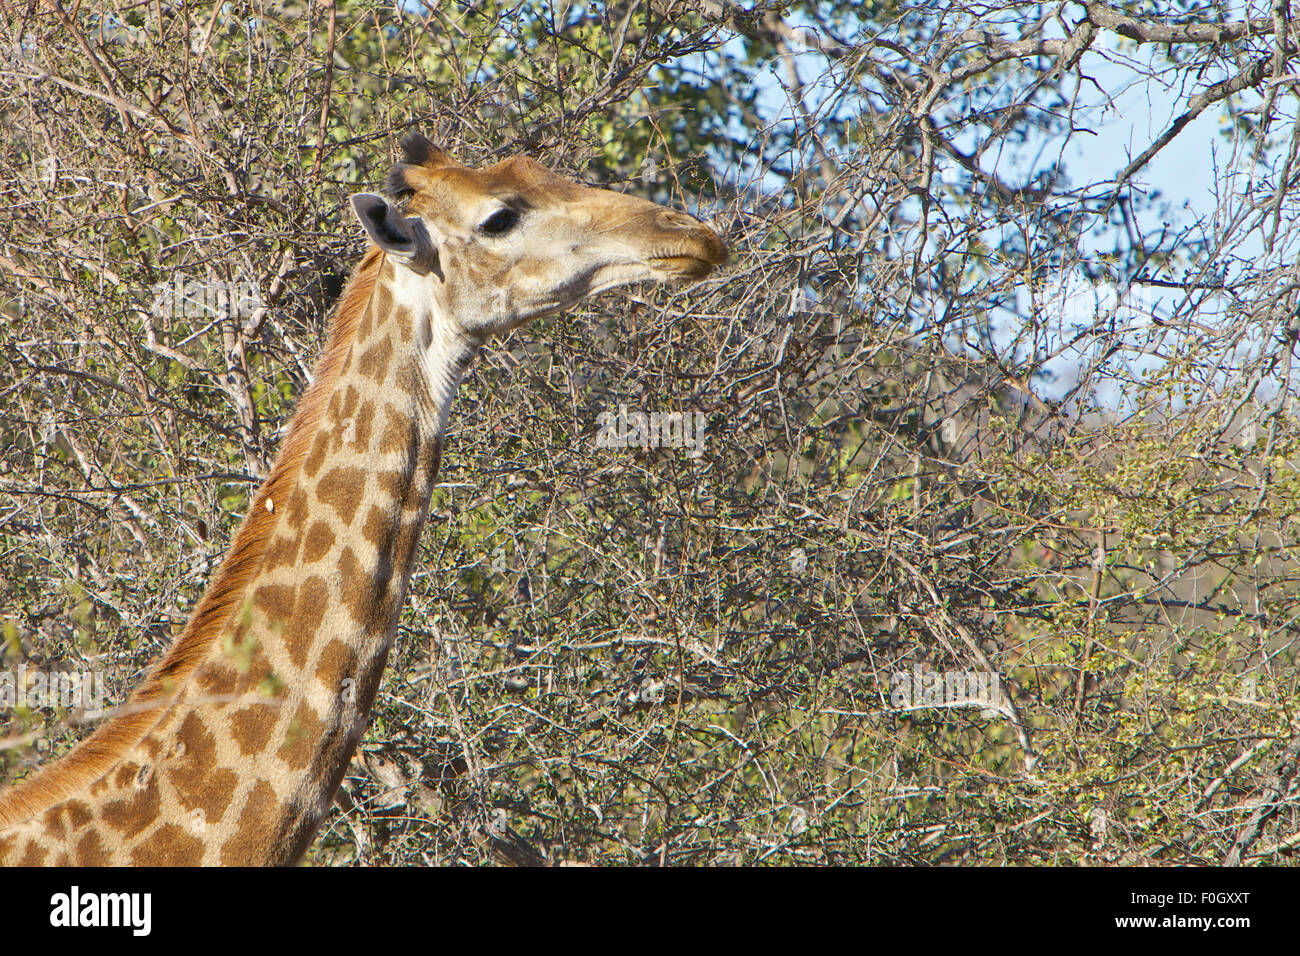 Giraffe eating in the Kruger National Park, South Africa Stock Photo